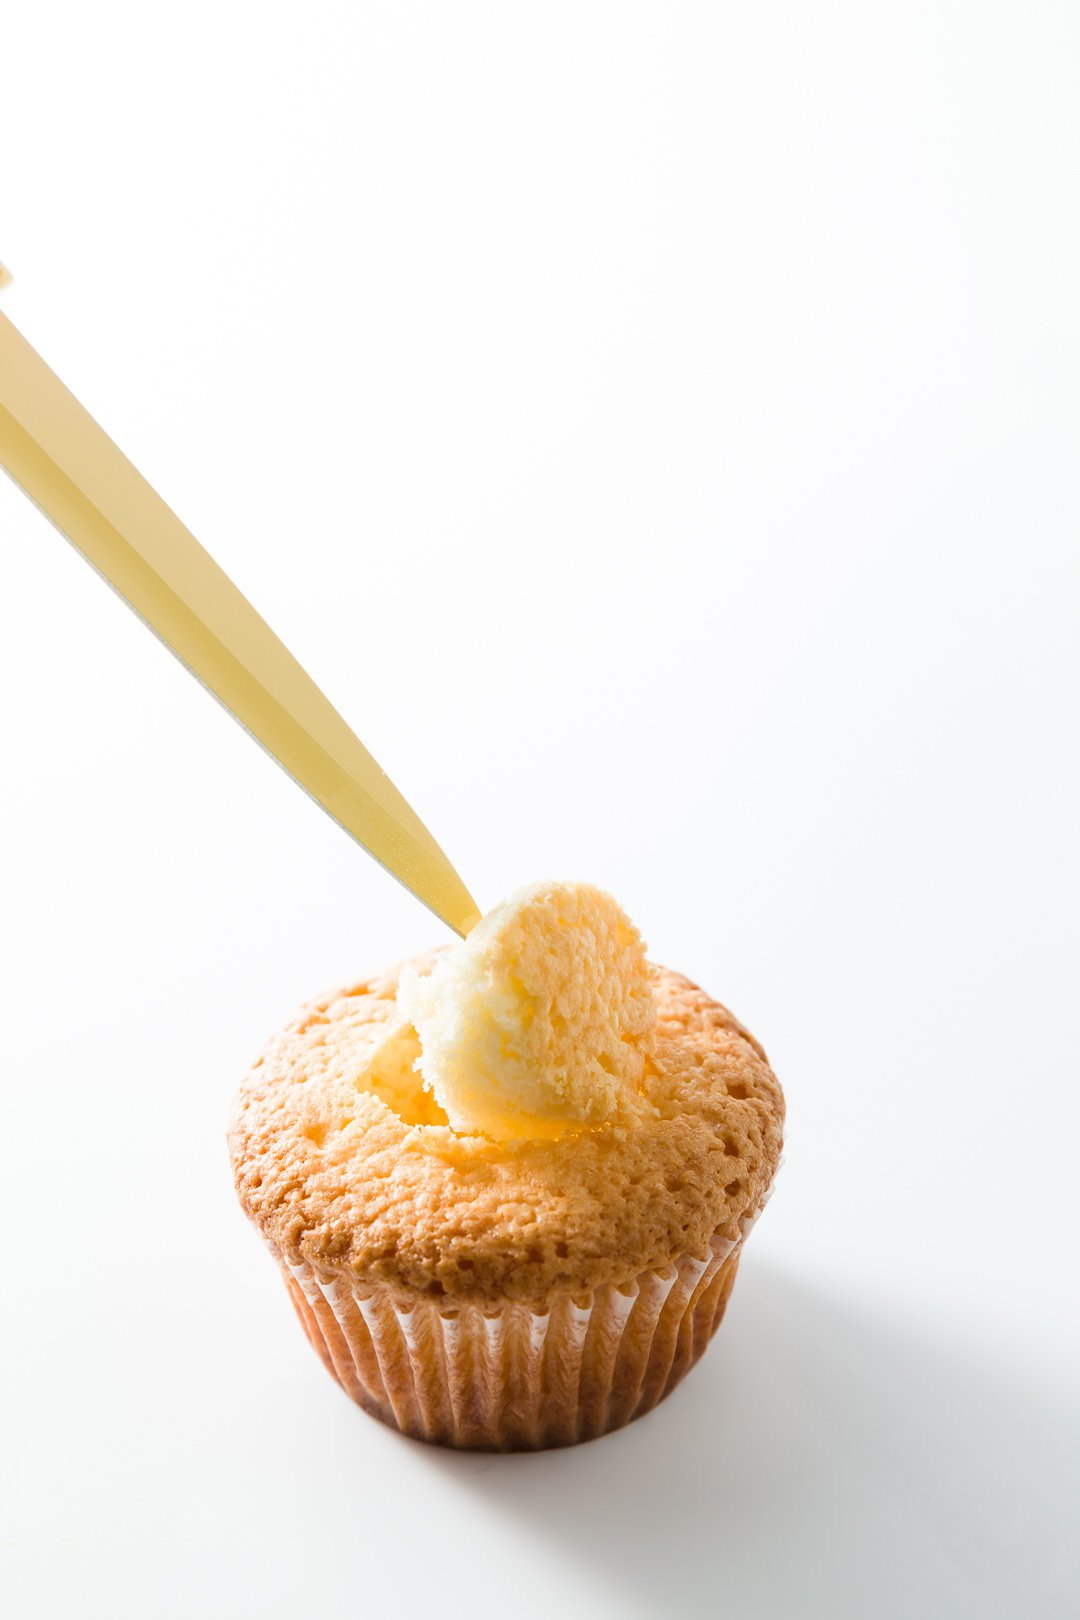 the core of a cupcake being removed with a knife